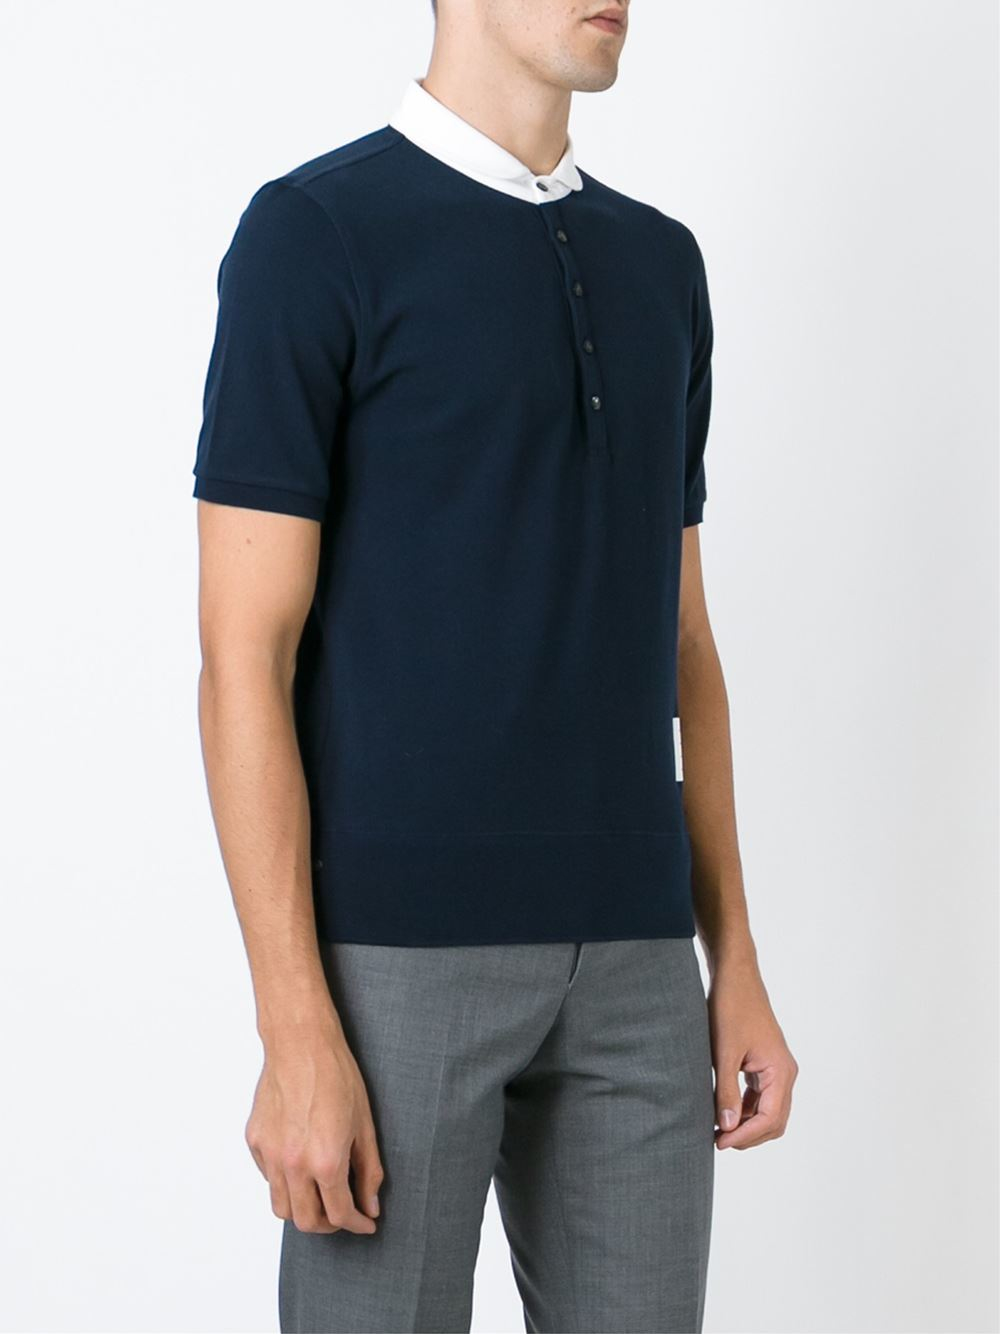 Thom browne Contrasted Collar Polo Shirt in Blue for Men | Lyst